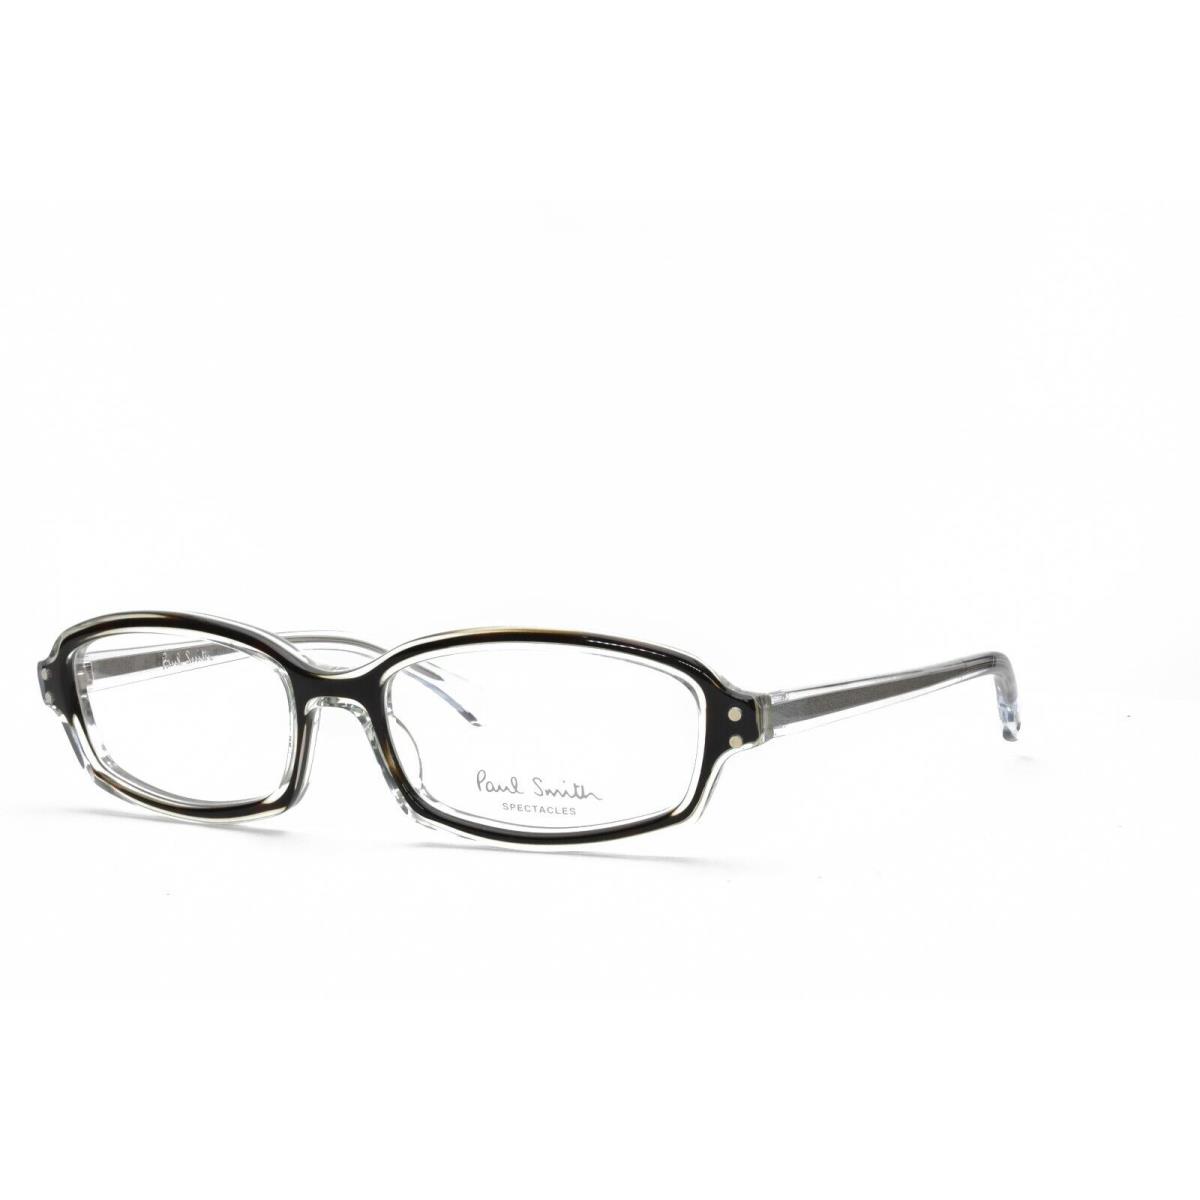 Paul Smith PS 431 Crysmb Eyeglasses Frames Only 51-16-135